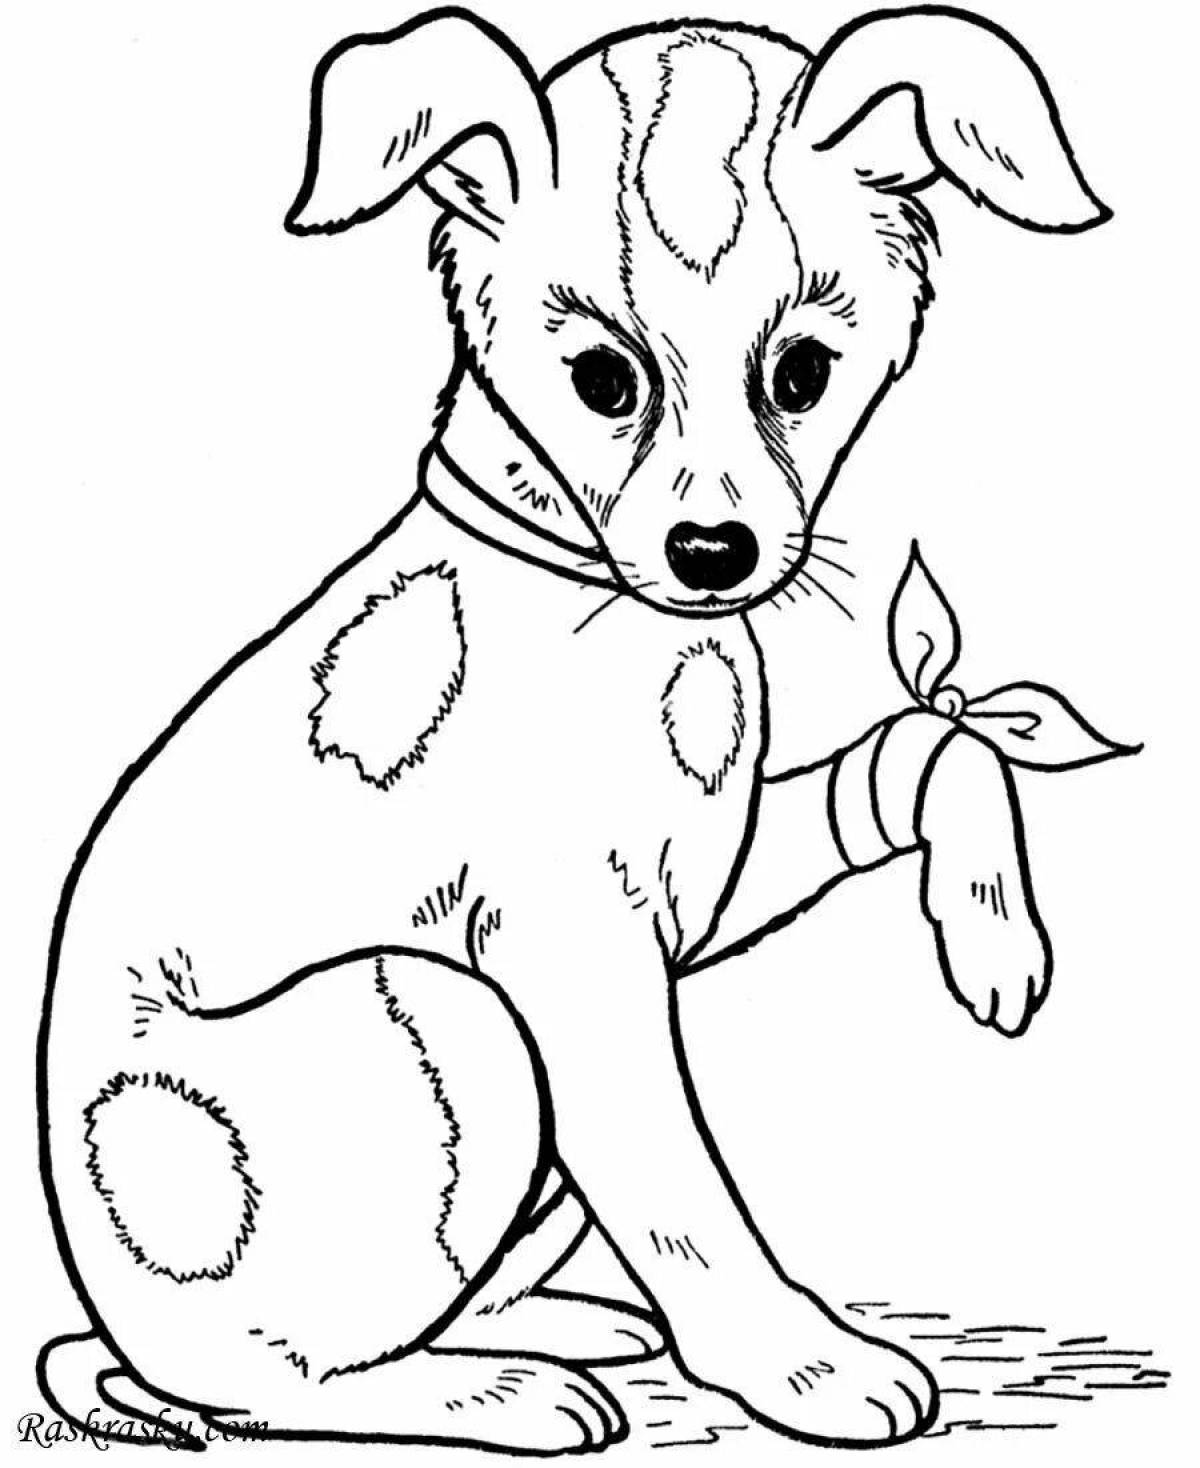 Incredible dog coloring book for kids 6-7 years old